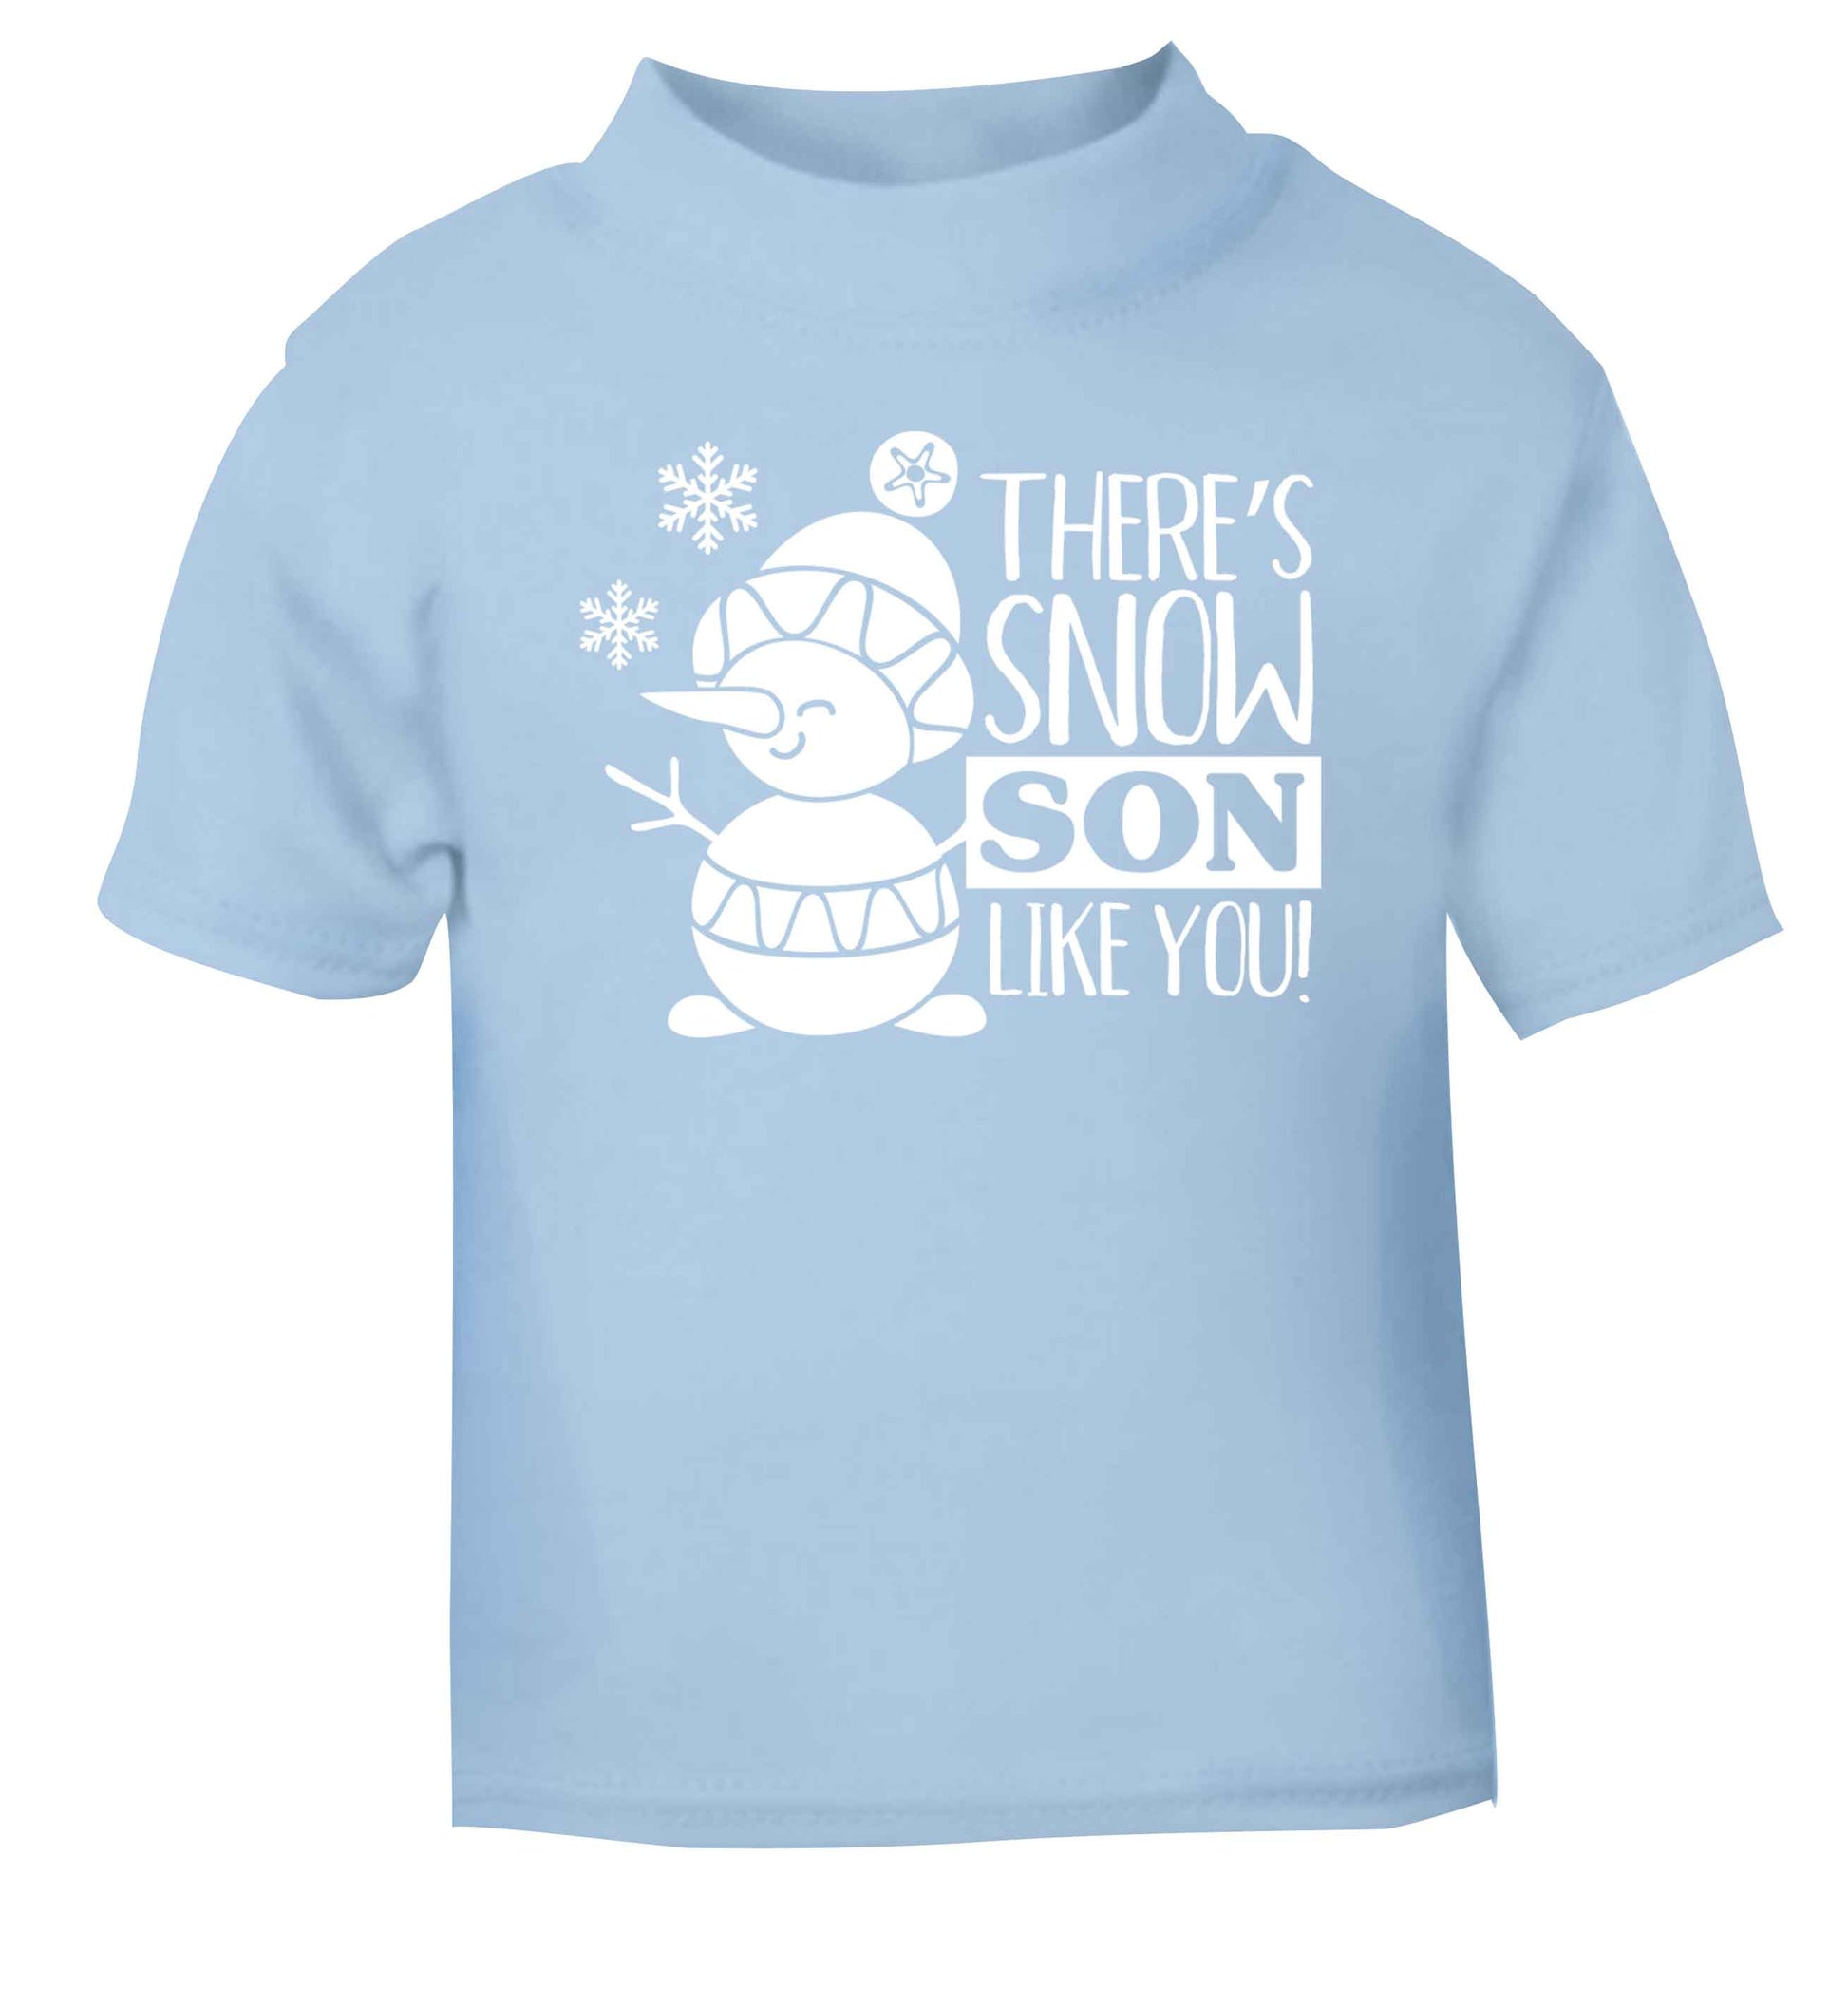 There's snow son like you light blue baby toddler Tshirt 2 Years